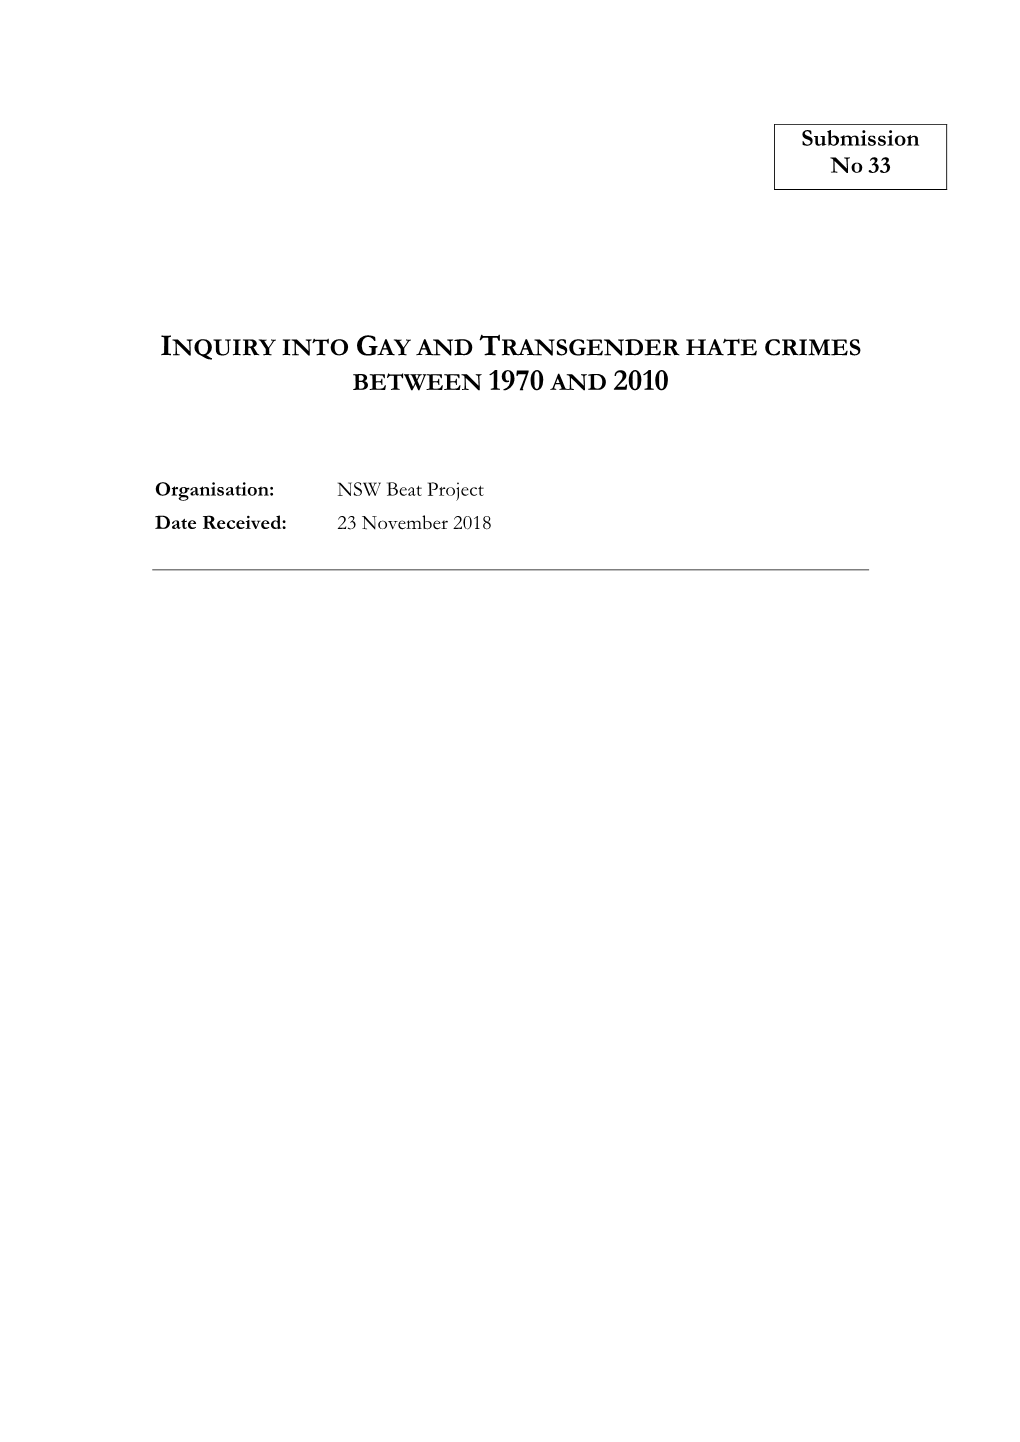 Submission No 33 INQUIRY INTO GAY and TRANSGENDER HATE